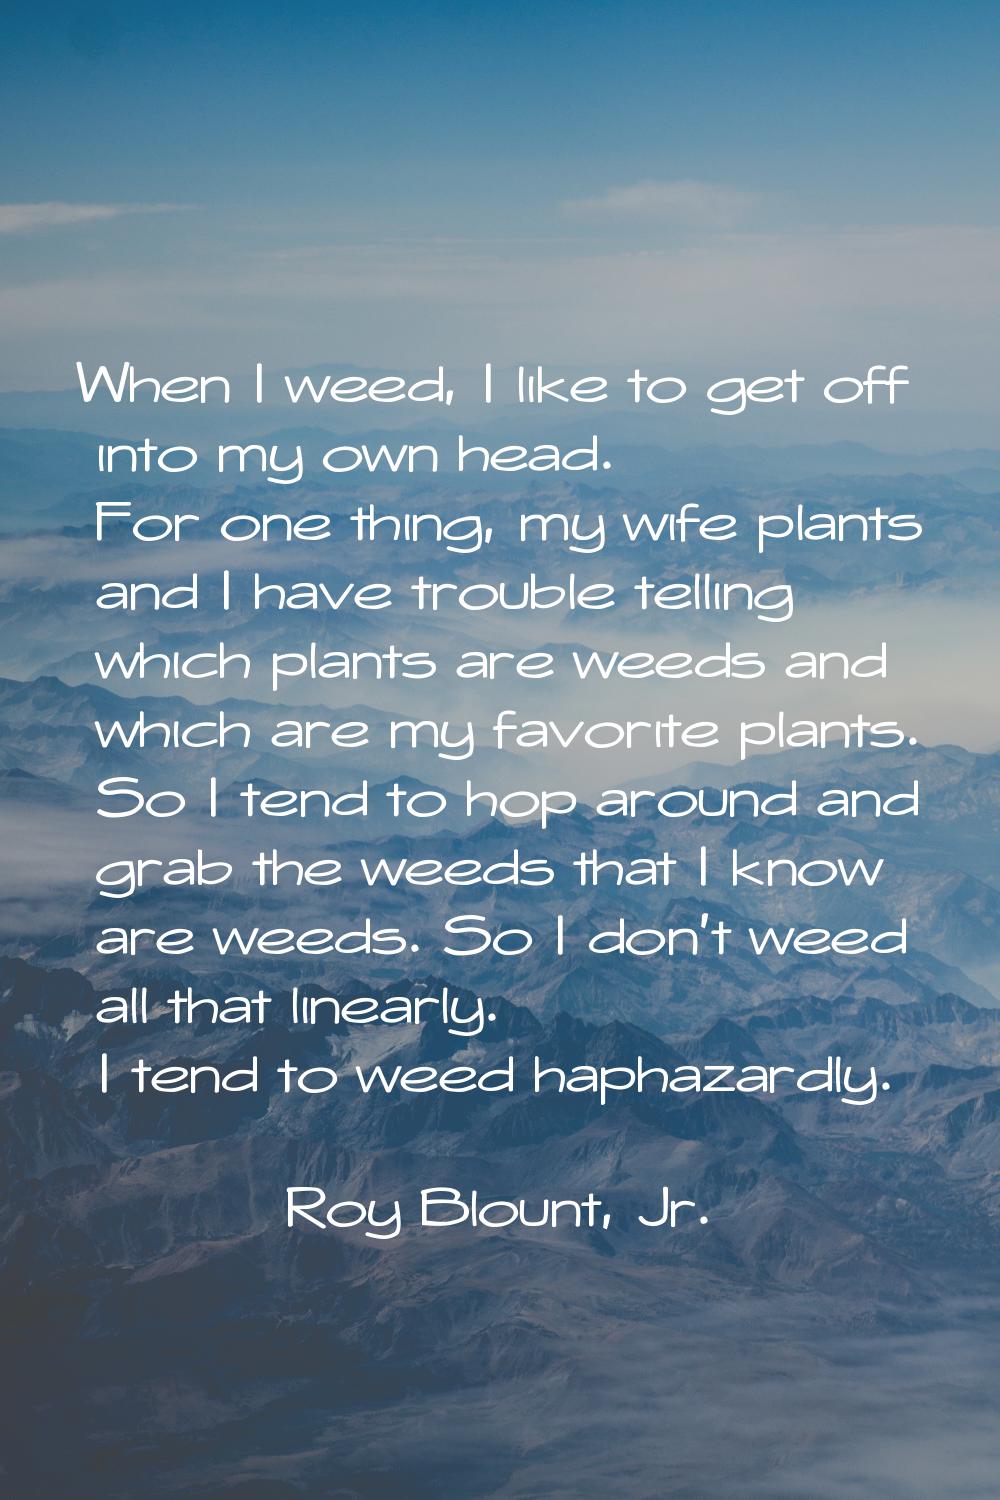 When I weed, I like to get off into my own head. For one thing, my wife plants and I have trouble t